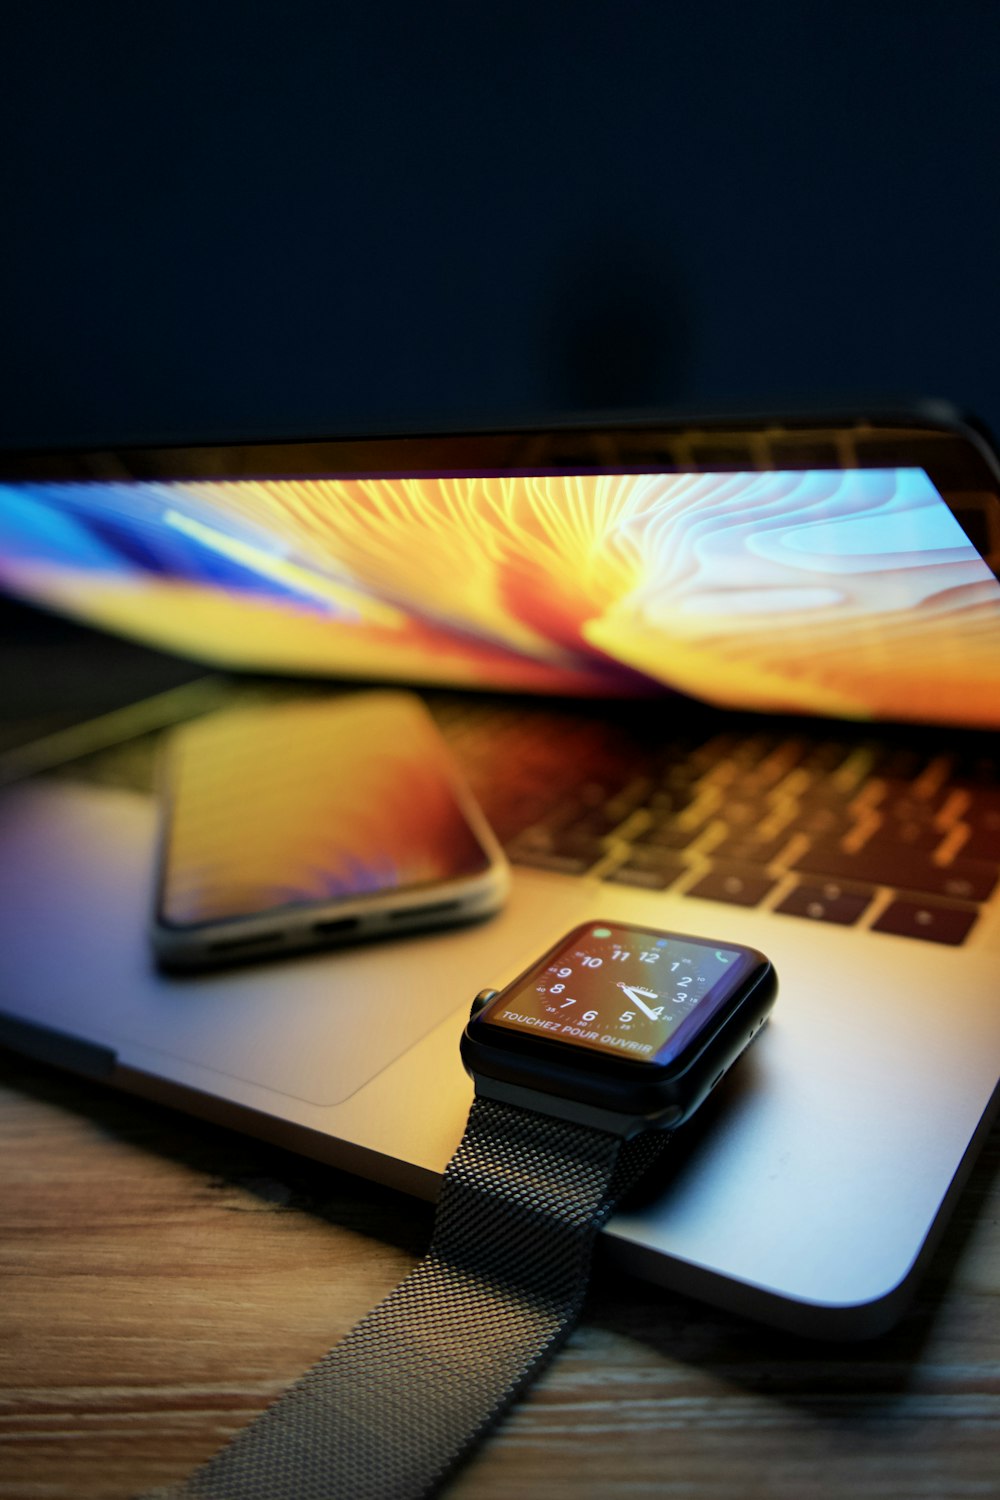 iPhone and Apple Watch on MacBook Pro